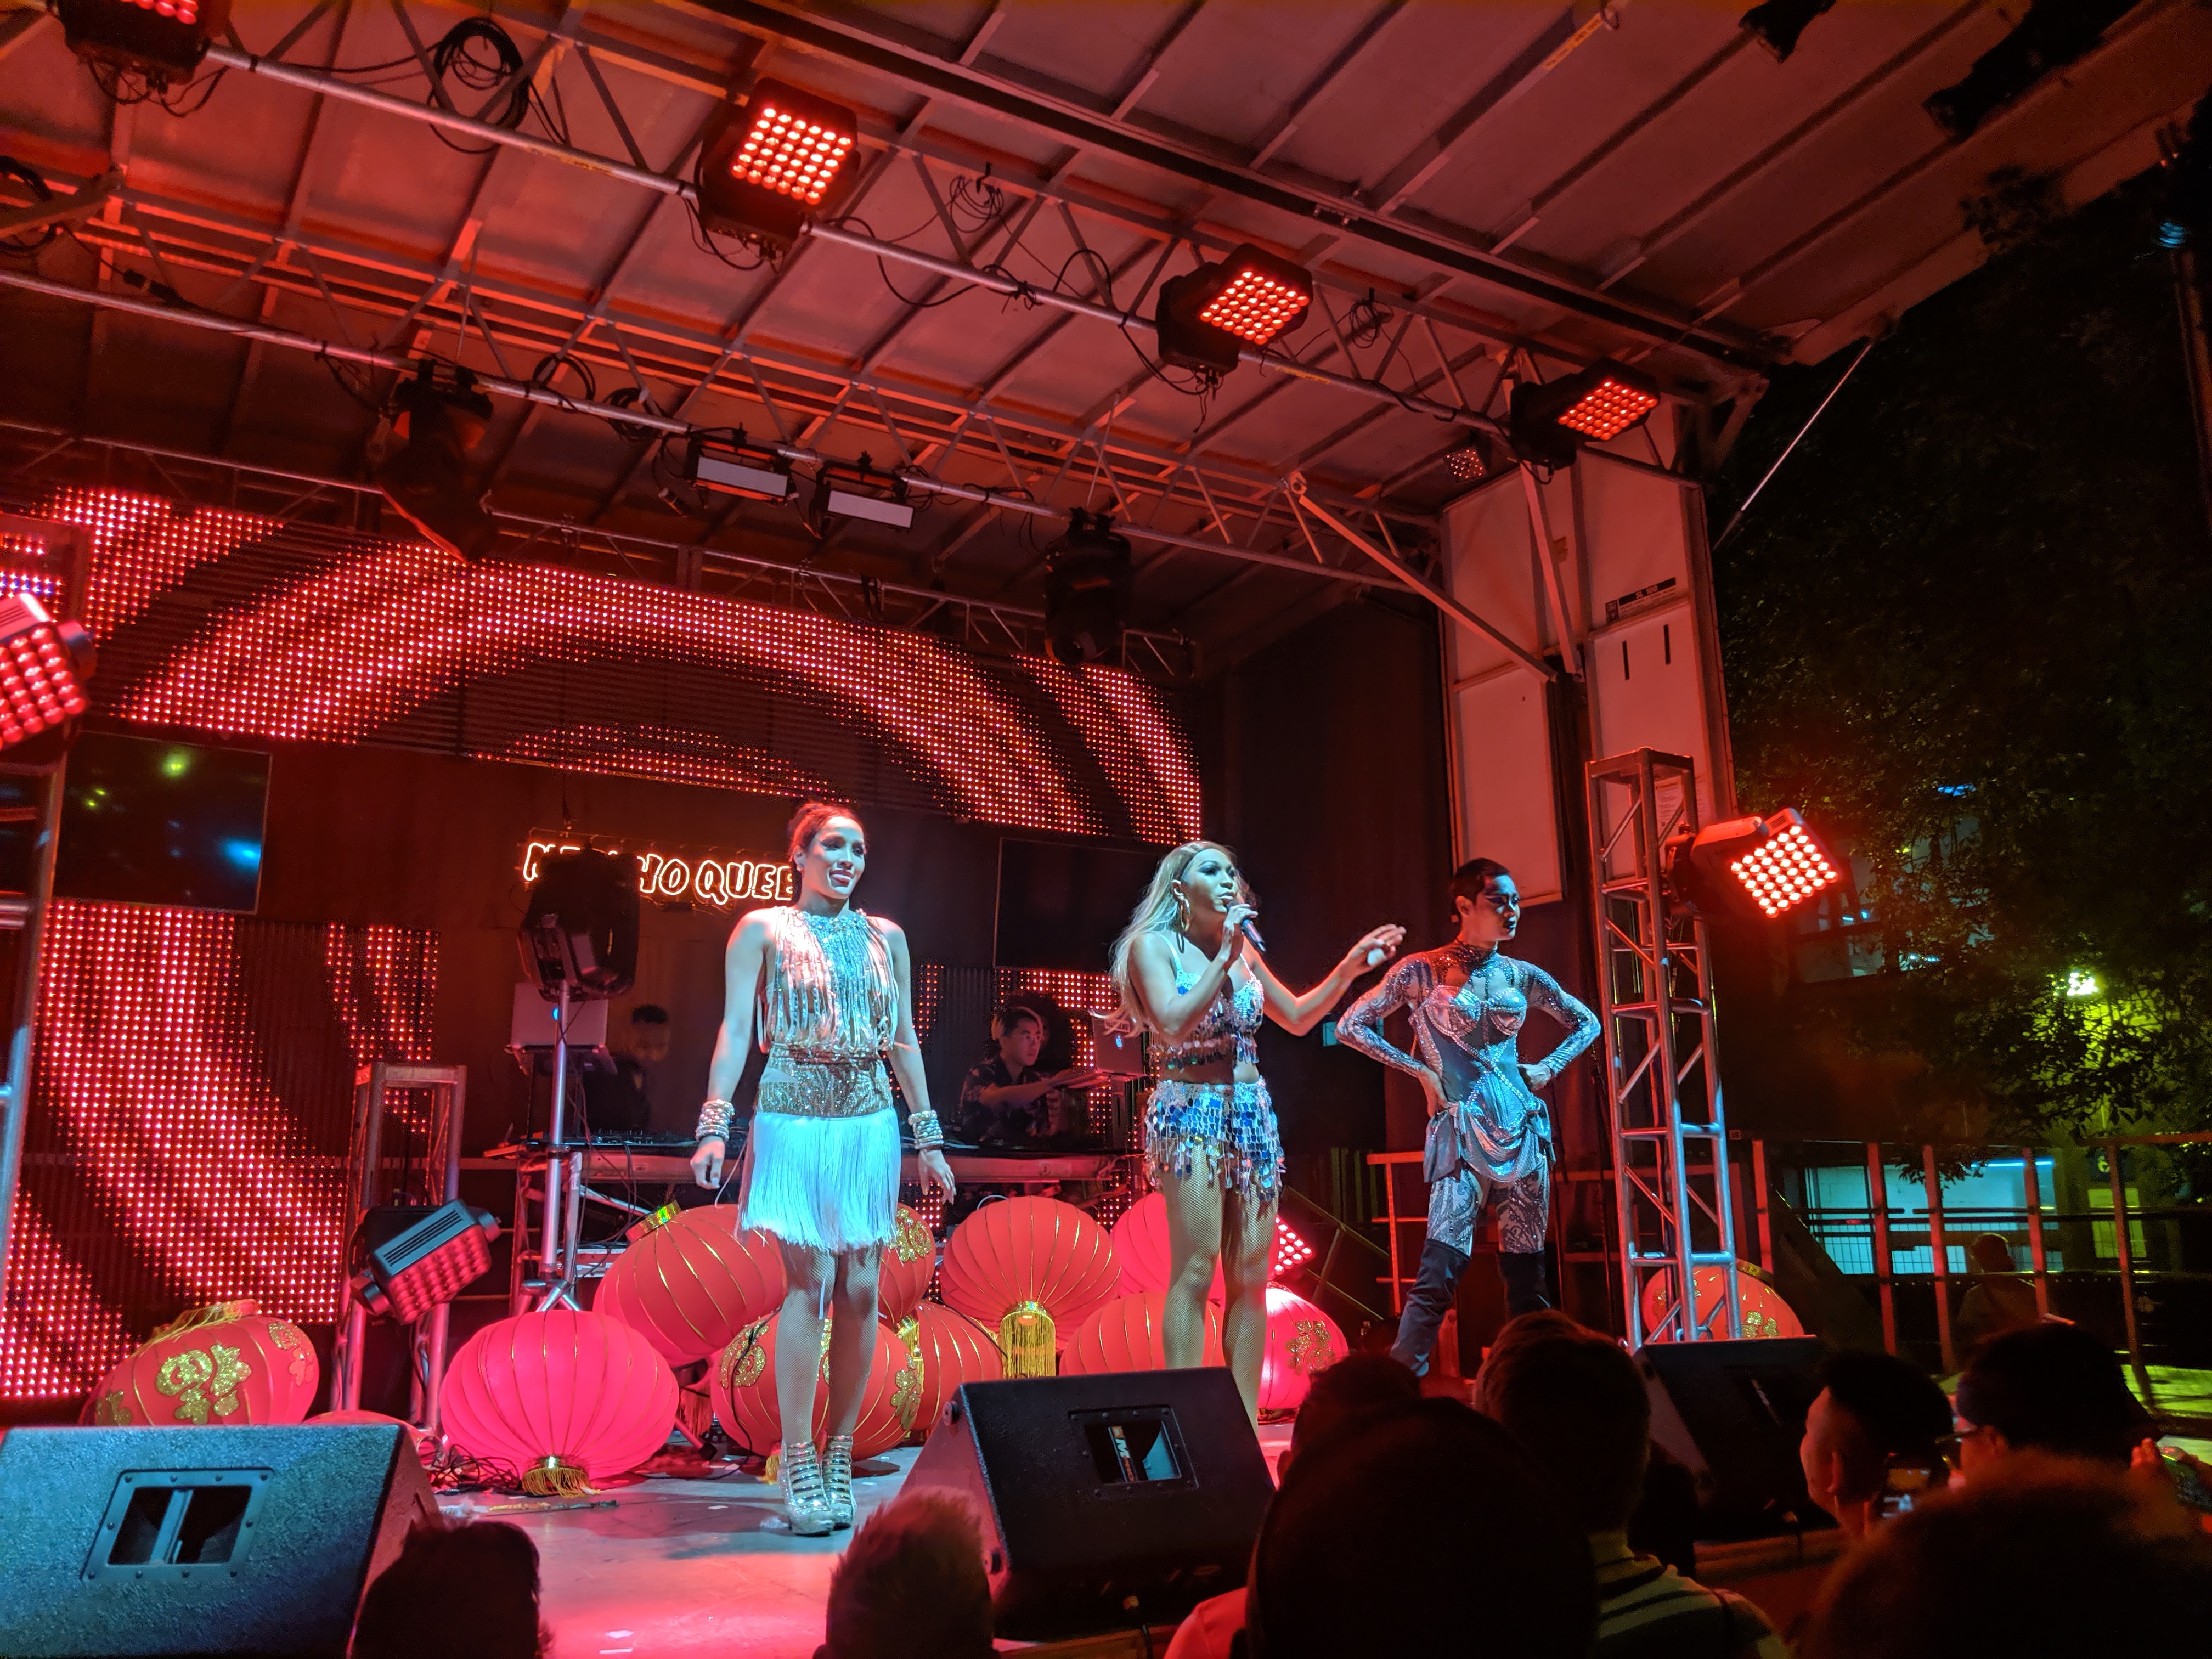 Drag Race Thailand's season two finalists lighting up Gould St. on the final day of Toronto Pride, 2019. From left to right: Kandy Zyanide, Angele Anang, Kana Warrior. June 23, 2019 at Toronto Pride's South Stage on Gould St.